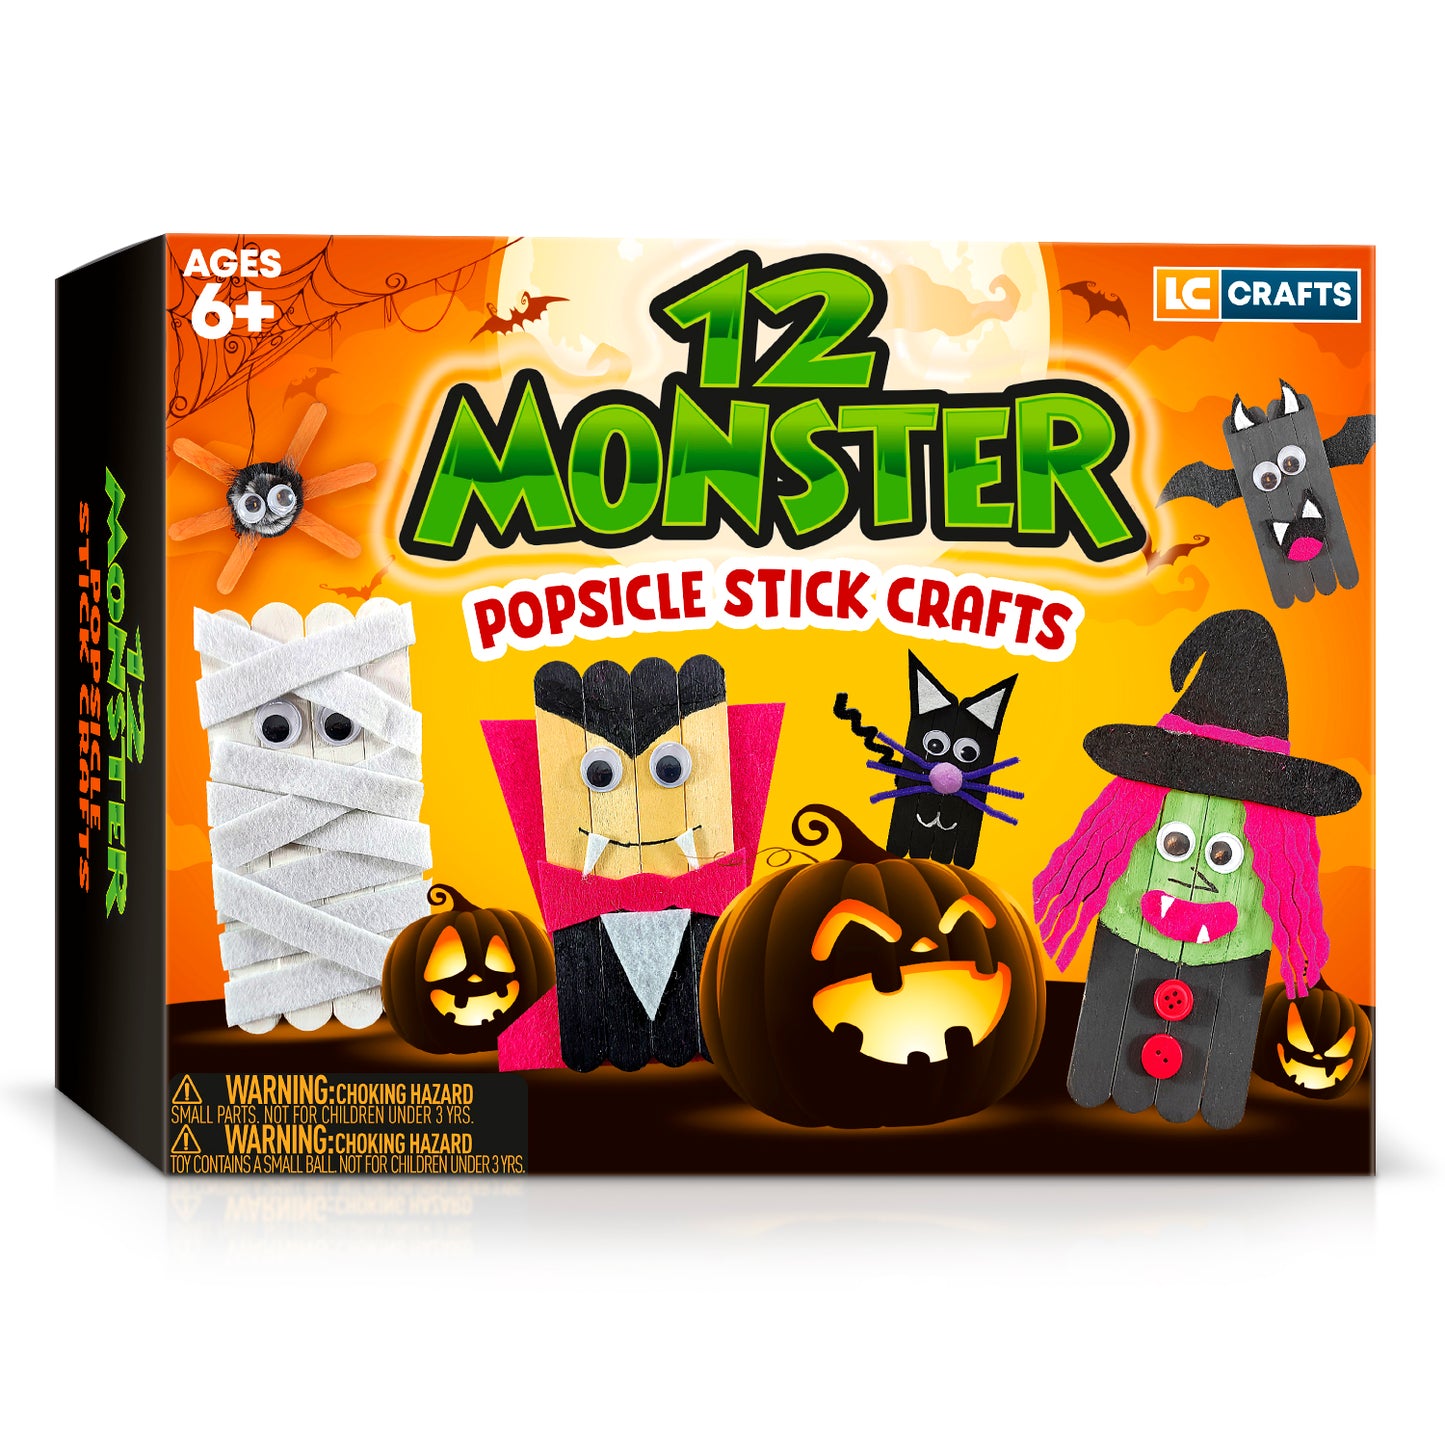 Halloween Arts and Craft Kit for Kids, Kit Includes All Supplies & Instructions to Create Halloween Monsters and Pumkin Best Halloween Activities for Kids